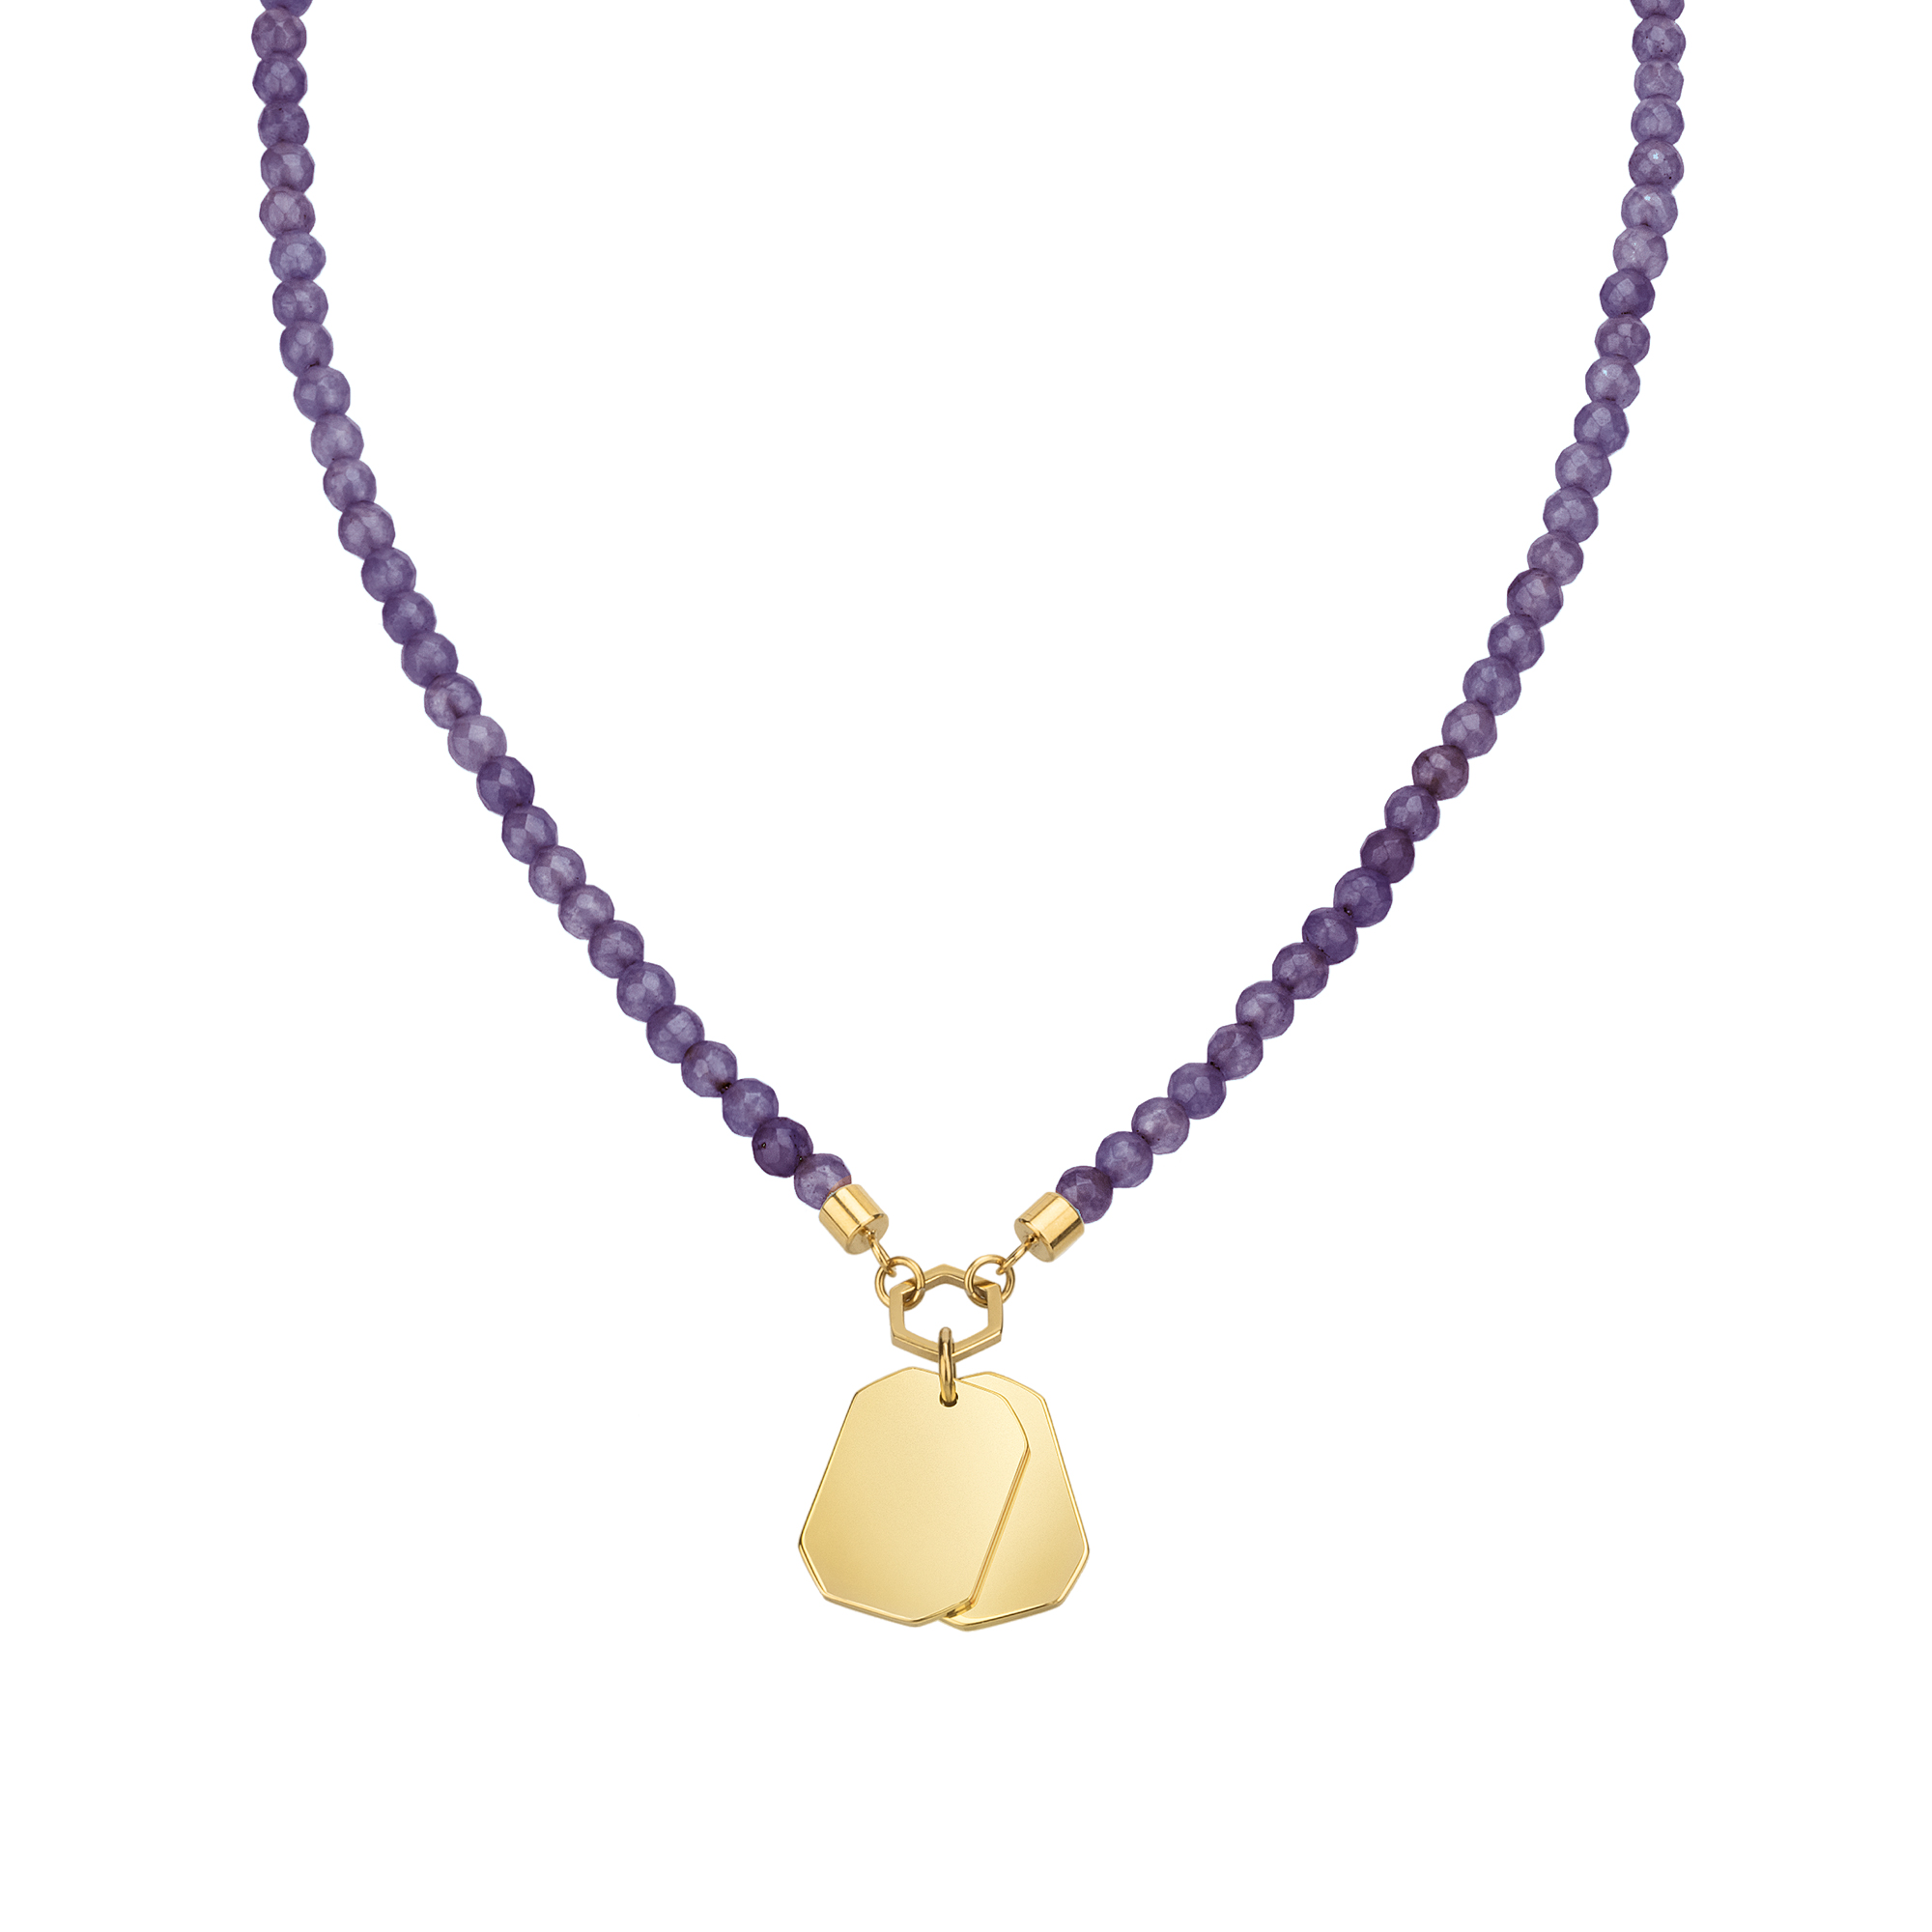 PRIVATE CODE - AMETHYST NECKLACE WITH IP GOLD STEEL PENDANT - 2 - TJ3151 | Breil